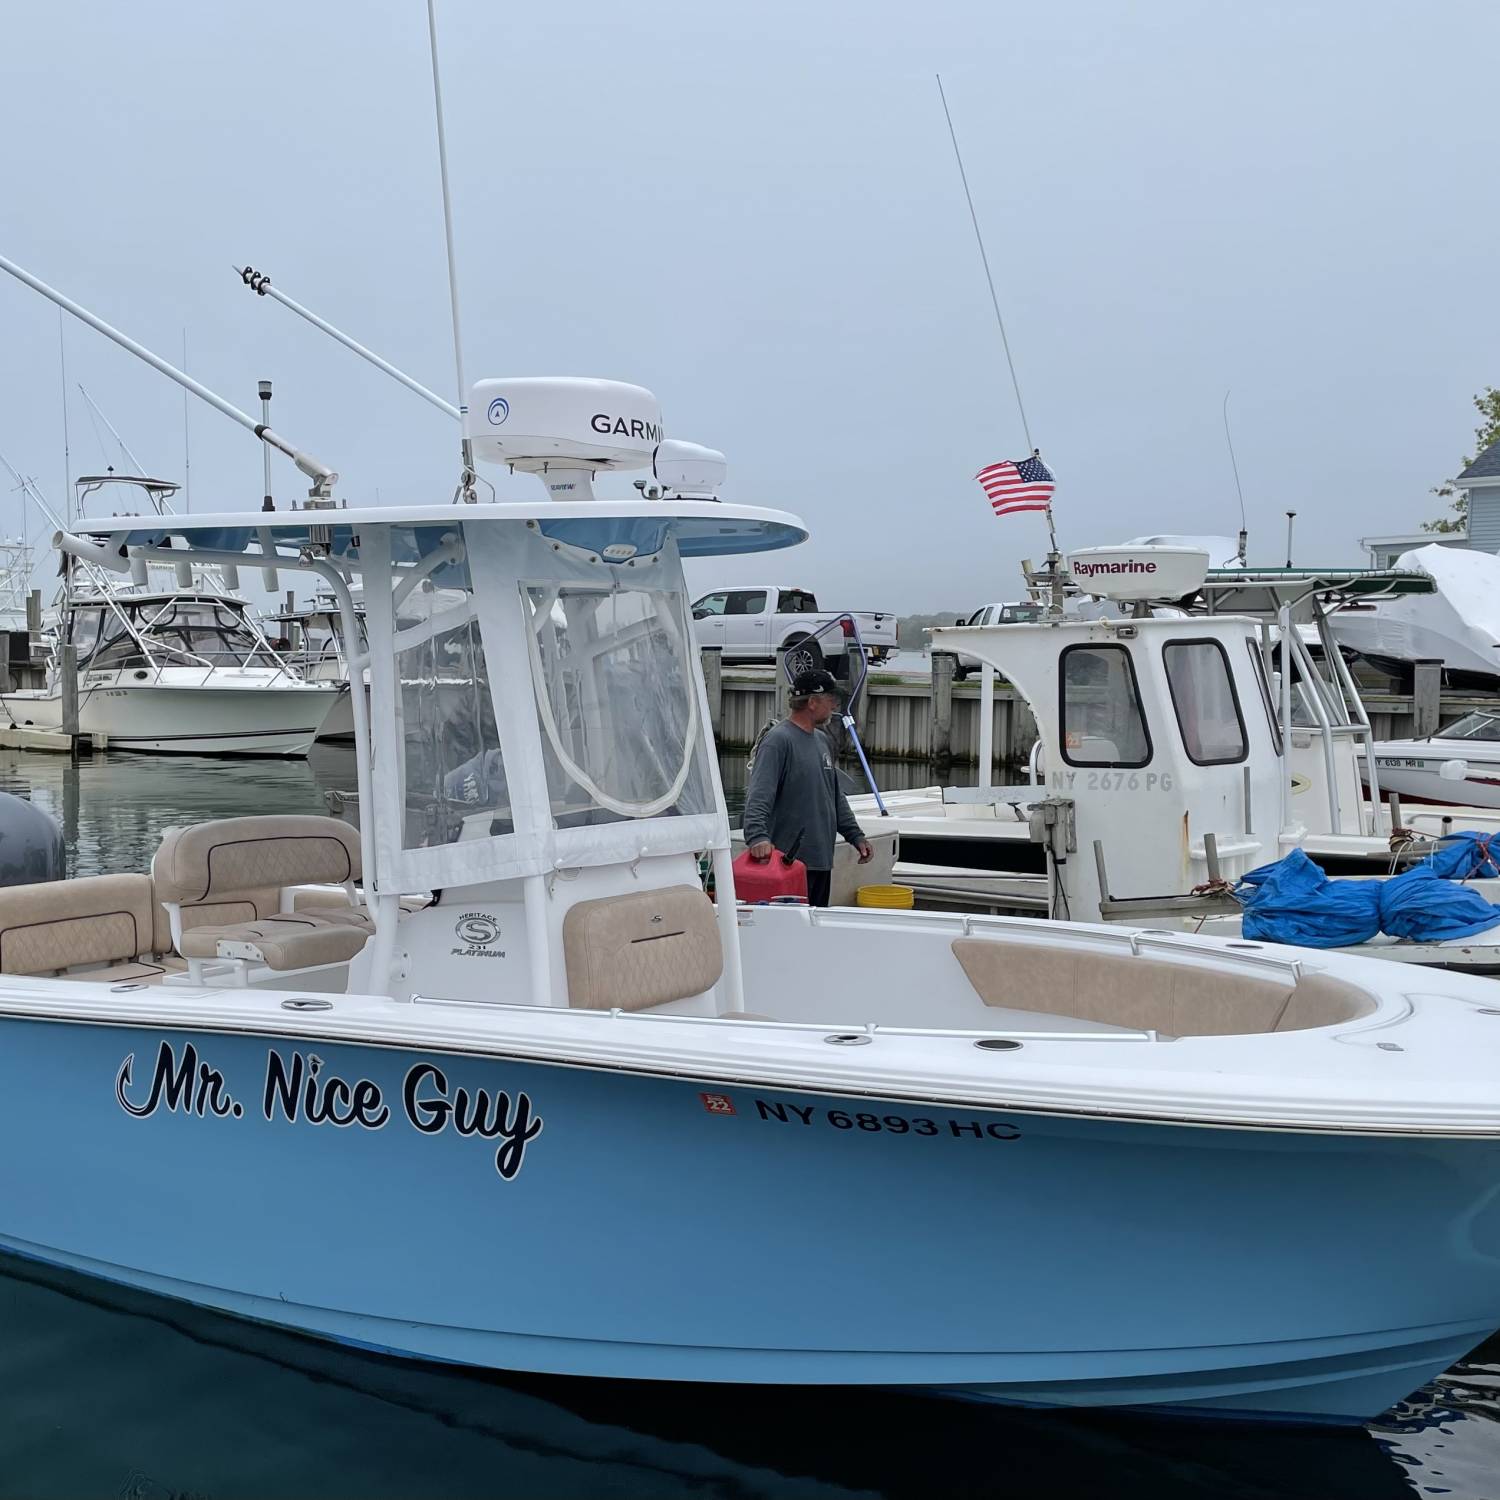 Title: Fishing machine - On board their Sportsman Heritage 231 Center Console - Location: Hampton bays NY. Participating in the Photo Contest #SportsmanMay